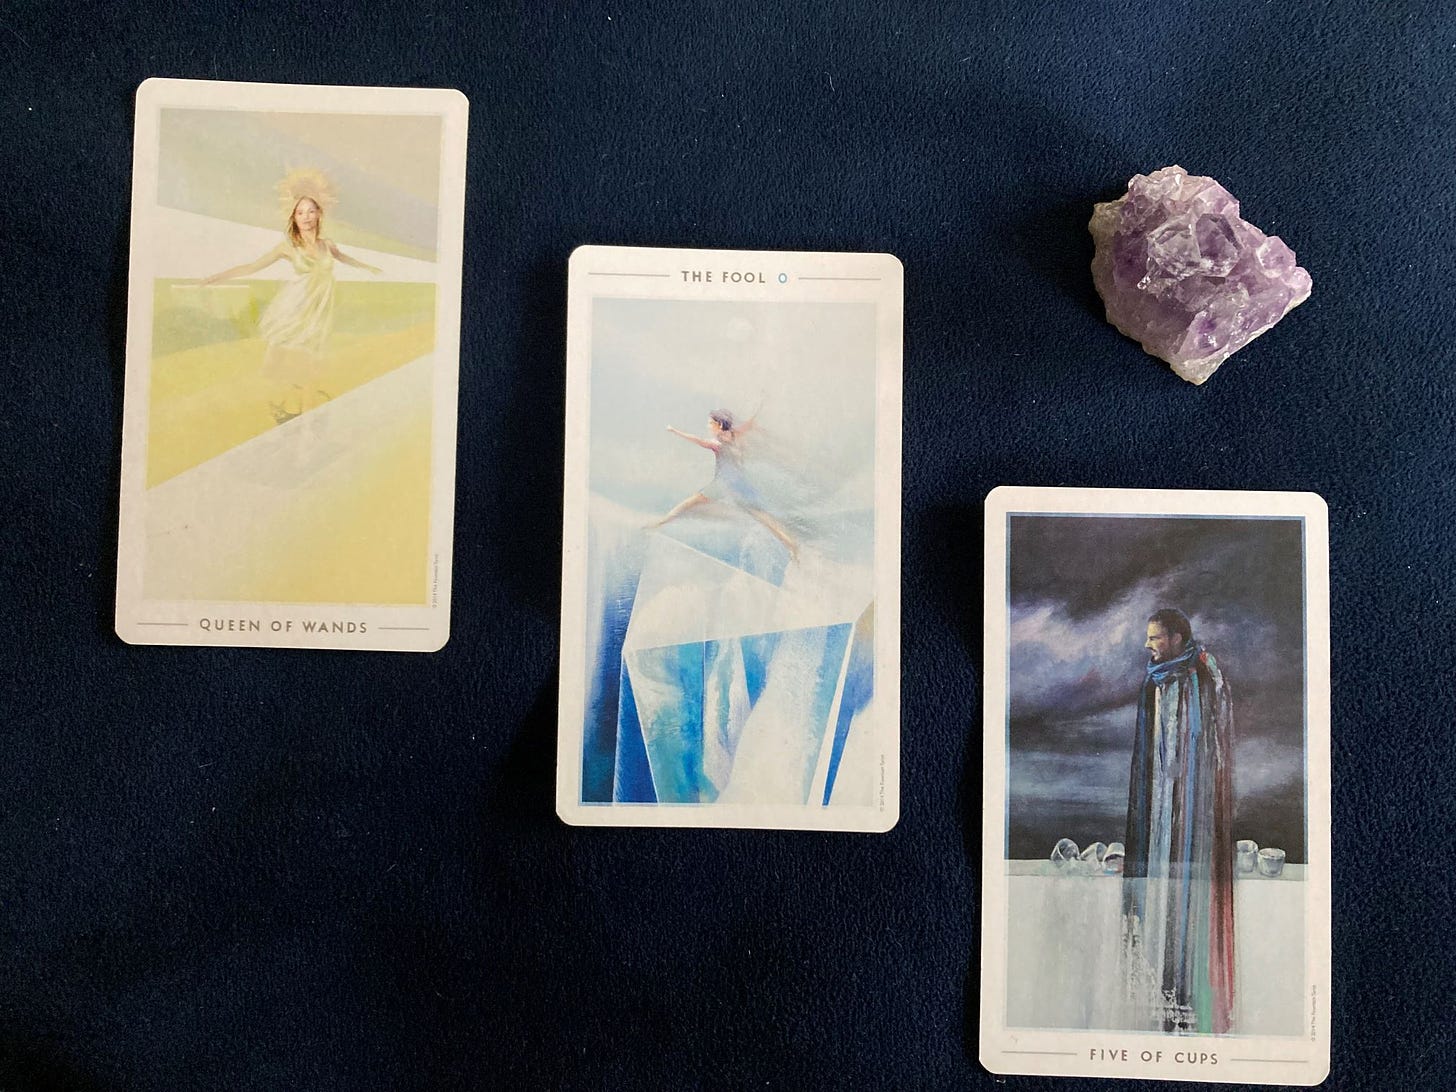 Three tarot cards lay on a blue velvet background with a purple crystal. The cards left to right are Queen of Wands, The Fool and Five of Cups